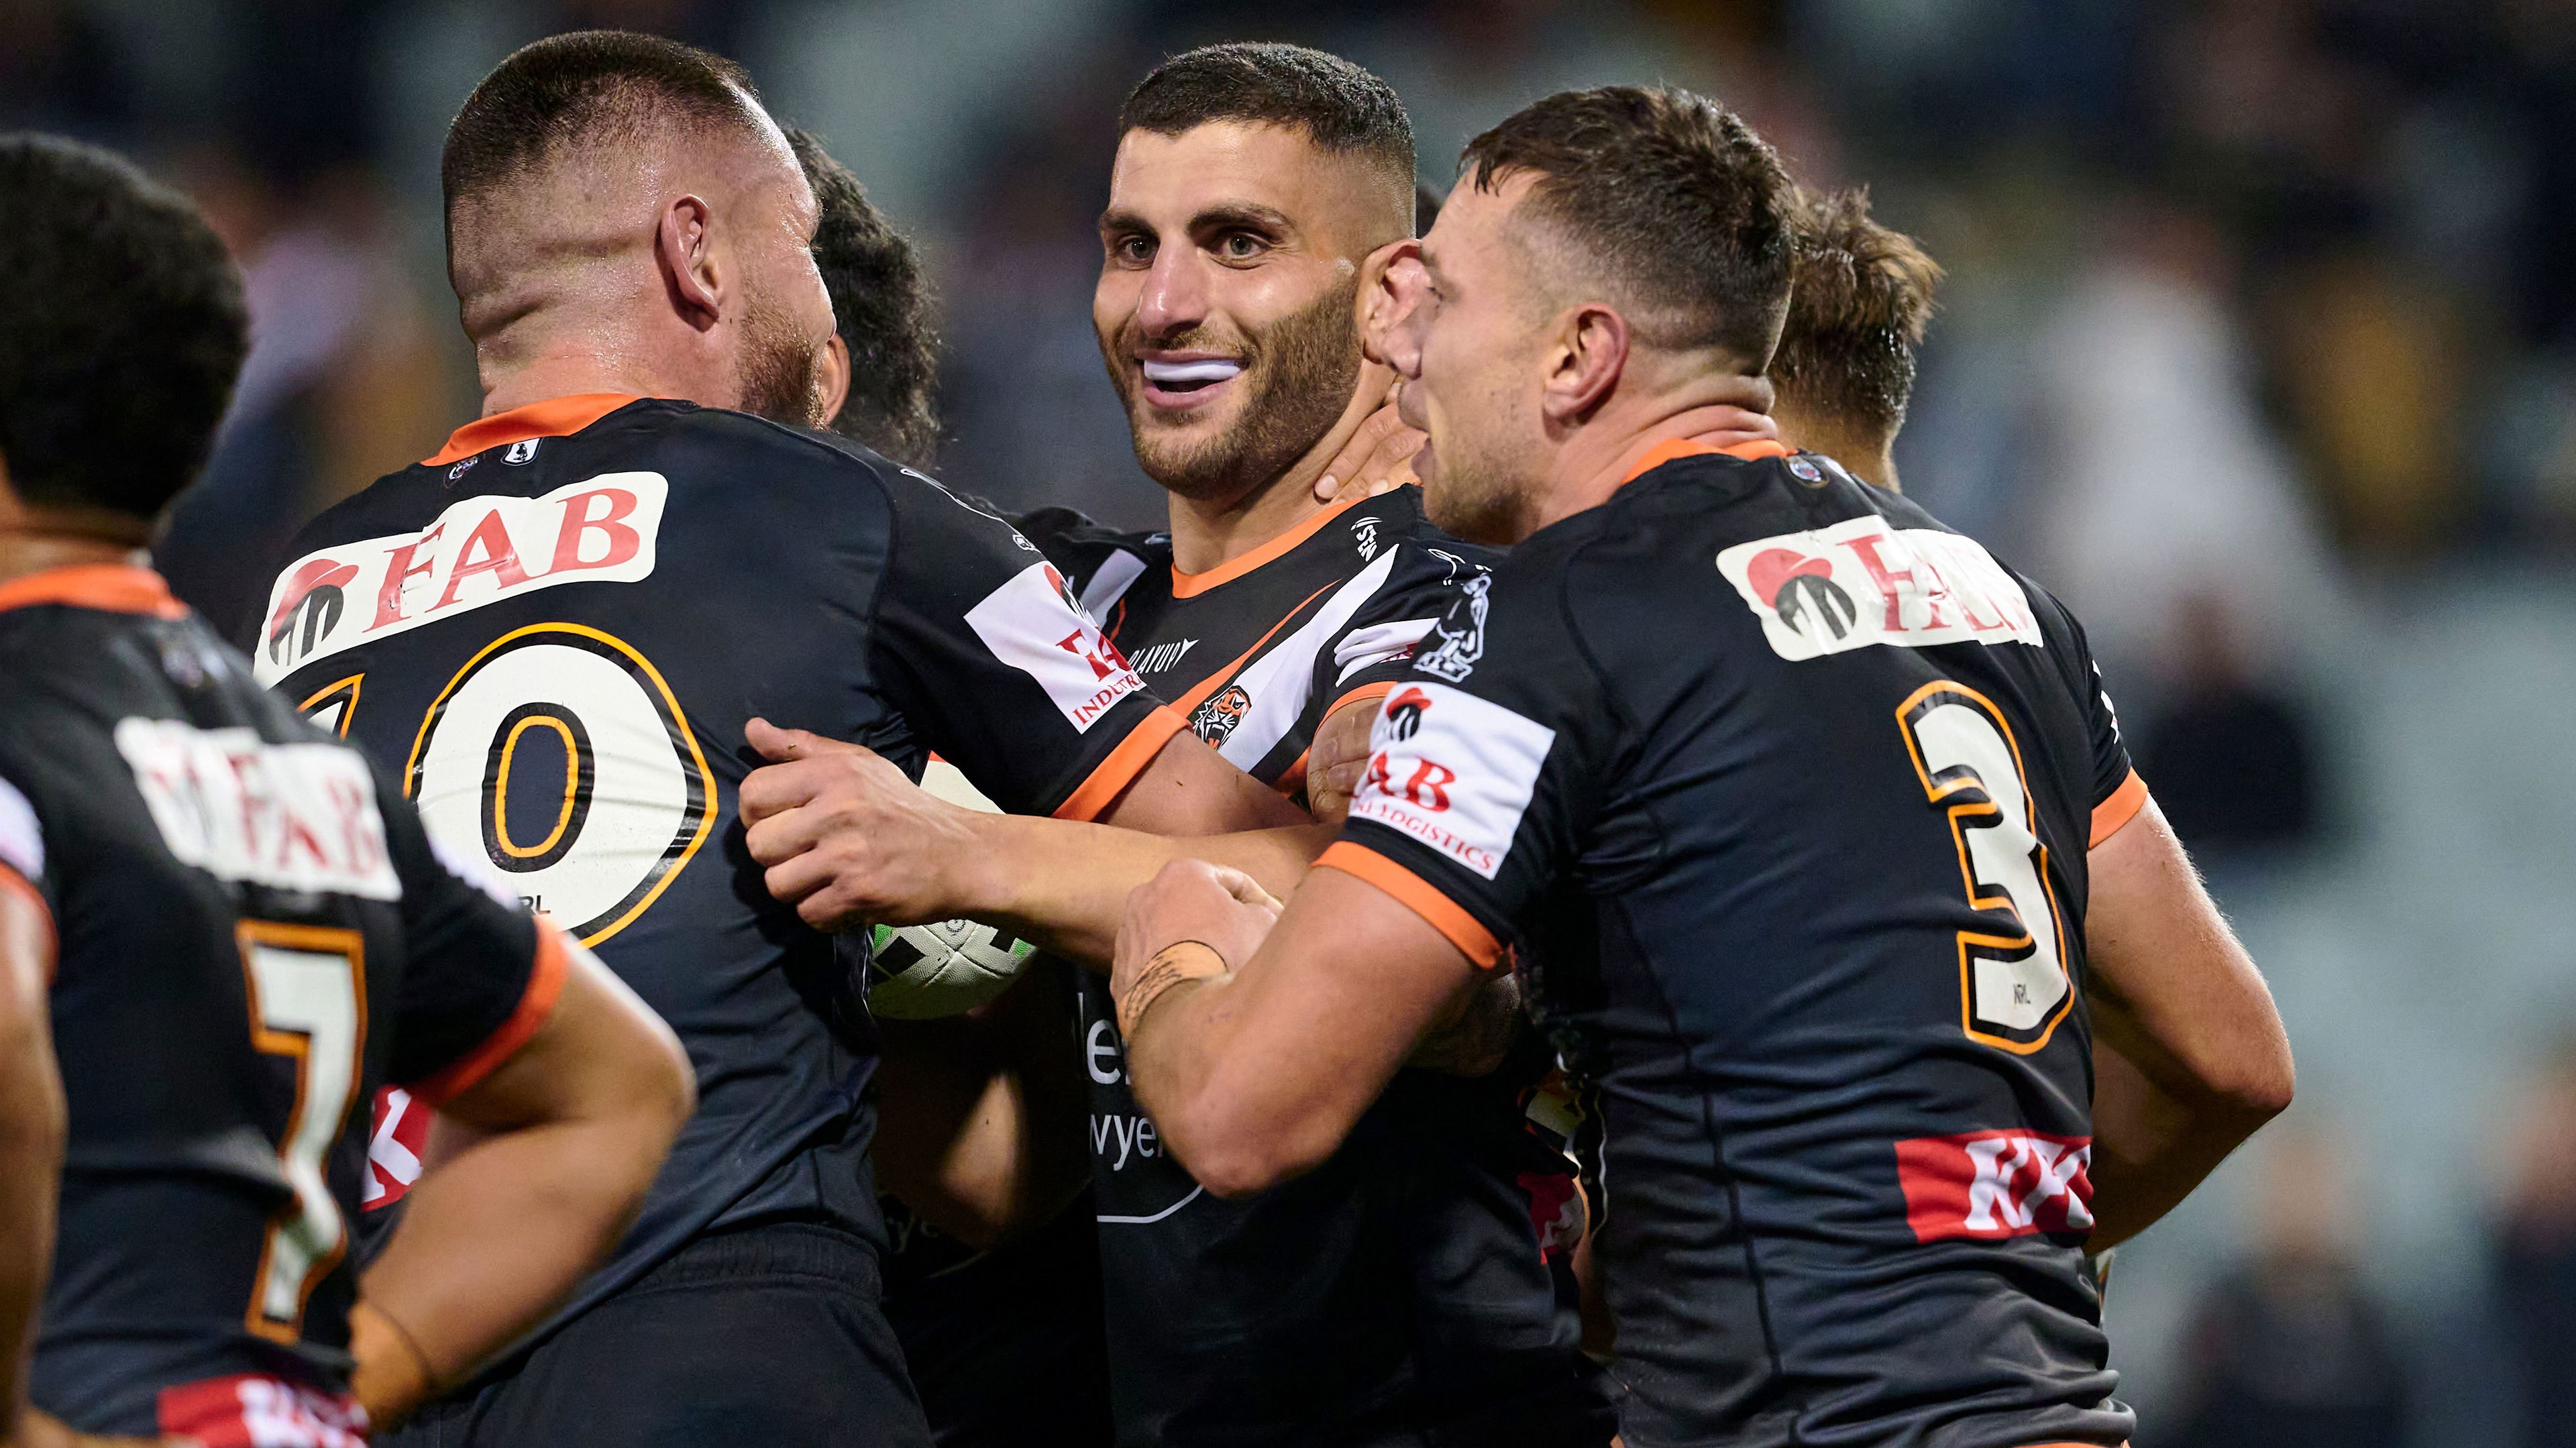 Alex Twal celebrates with Tigers teammates after scoring his first NRL try.